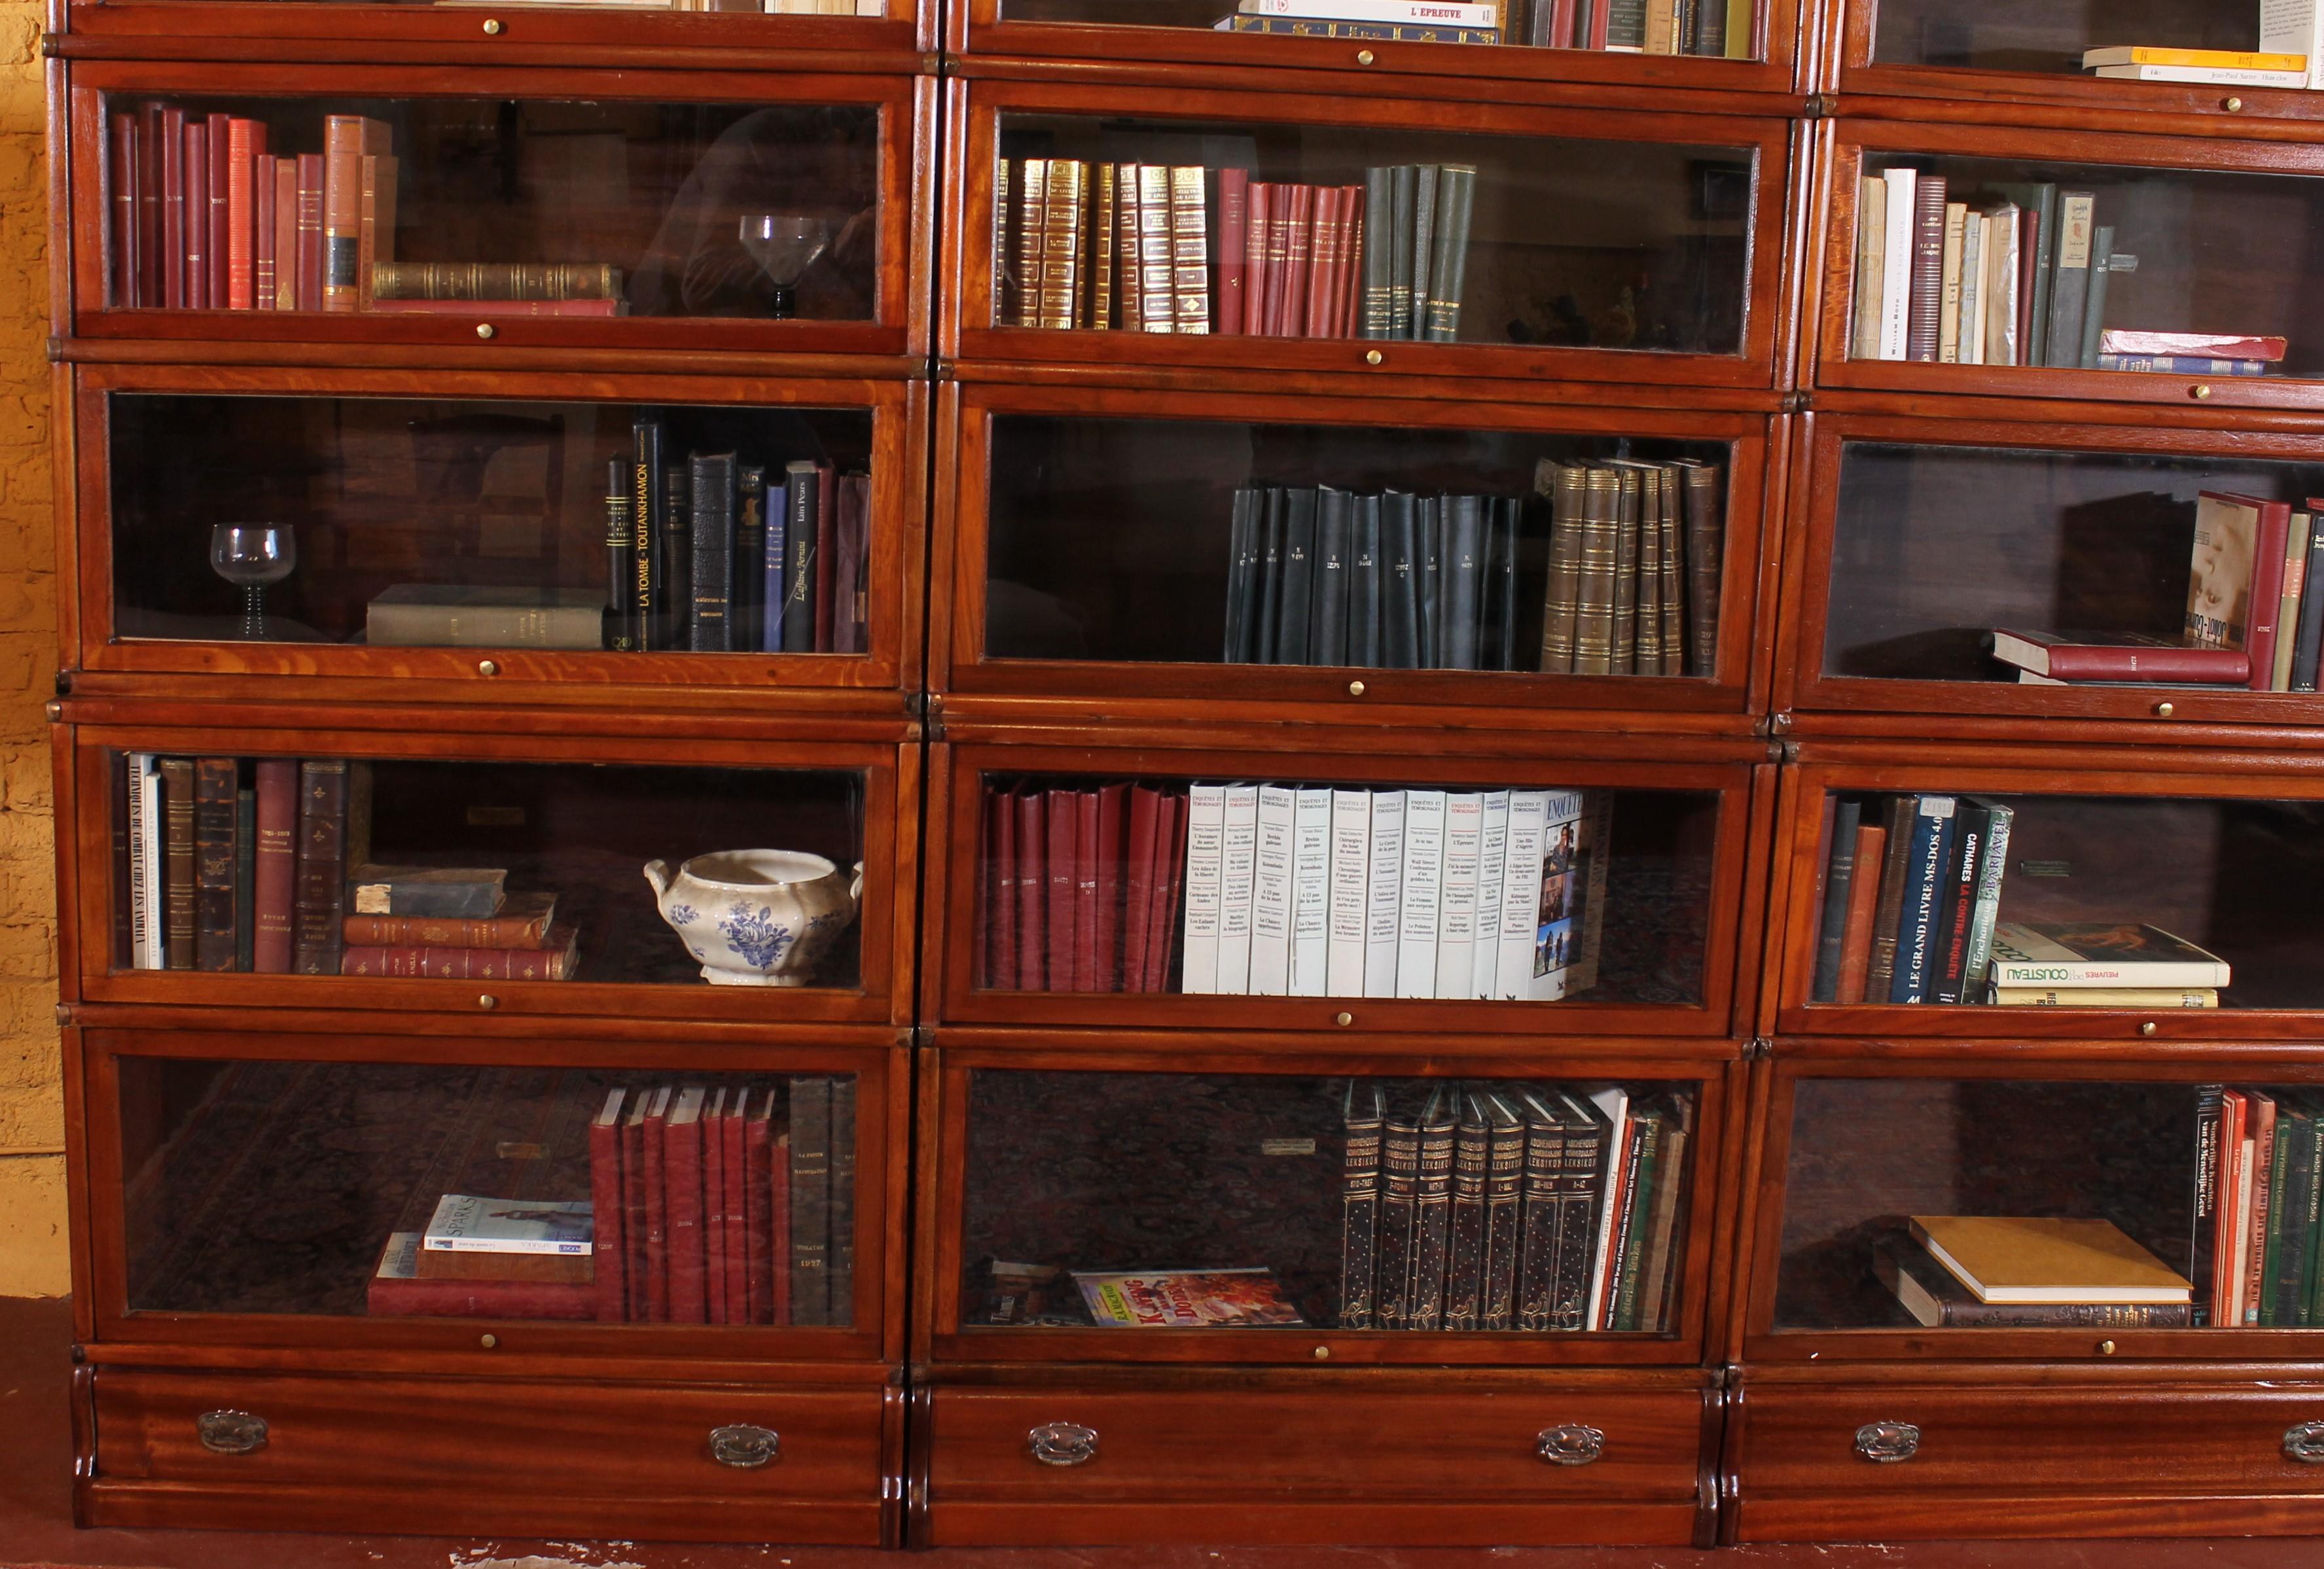 British A Set Of 4 Globe Wernicke Bookcases In Mahogany-19th Century For Sale